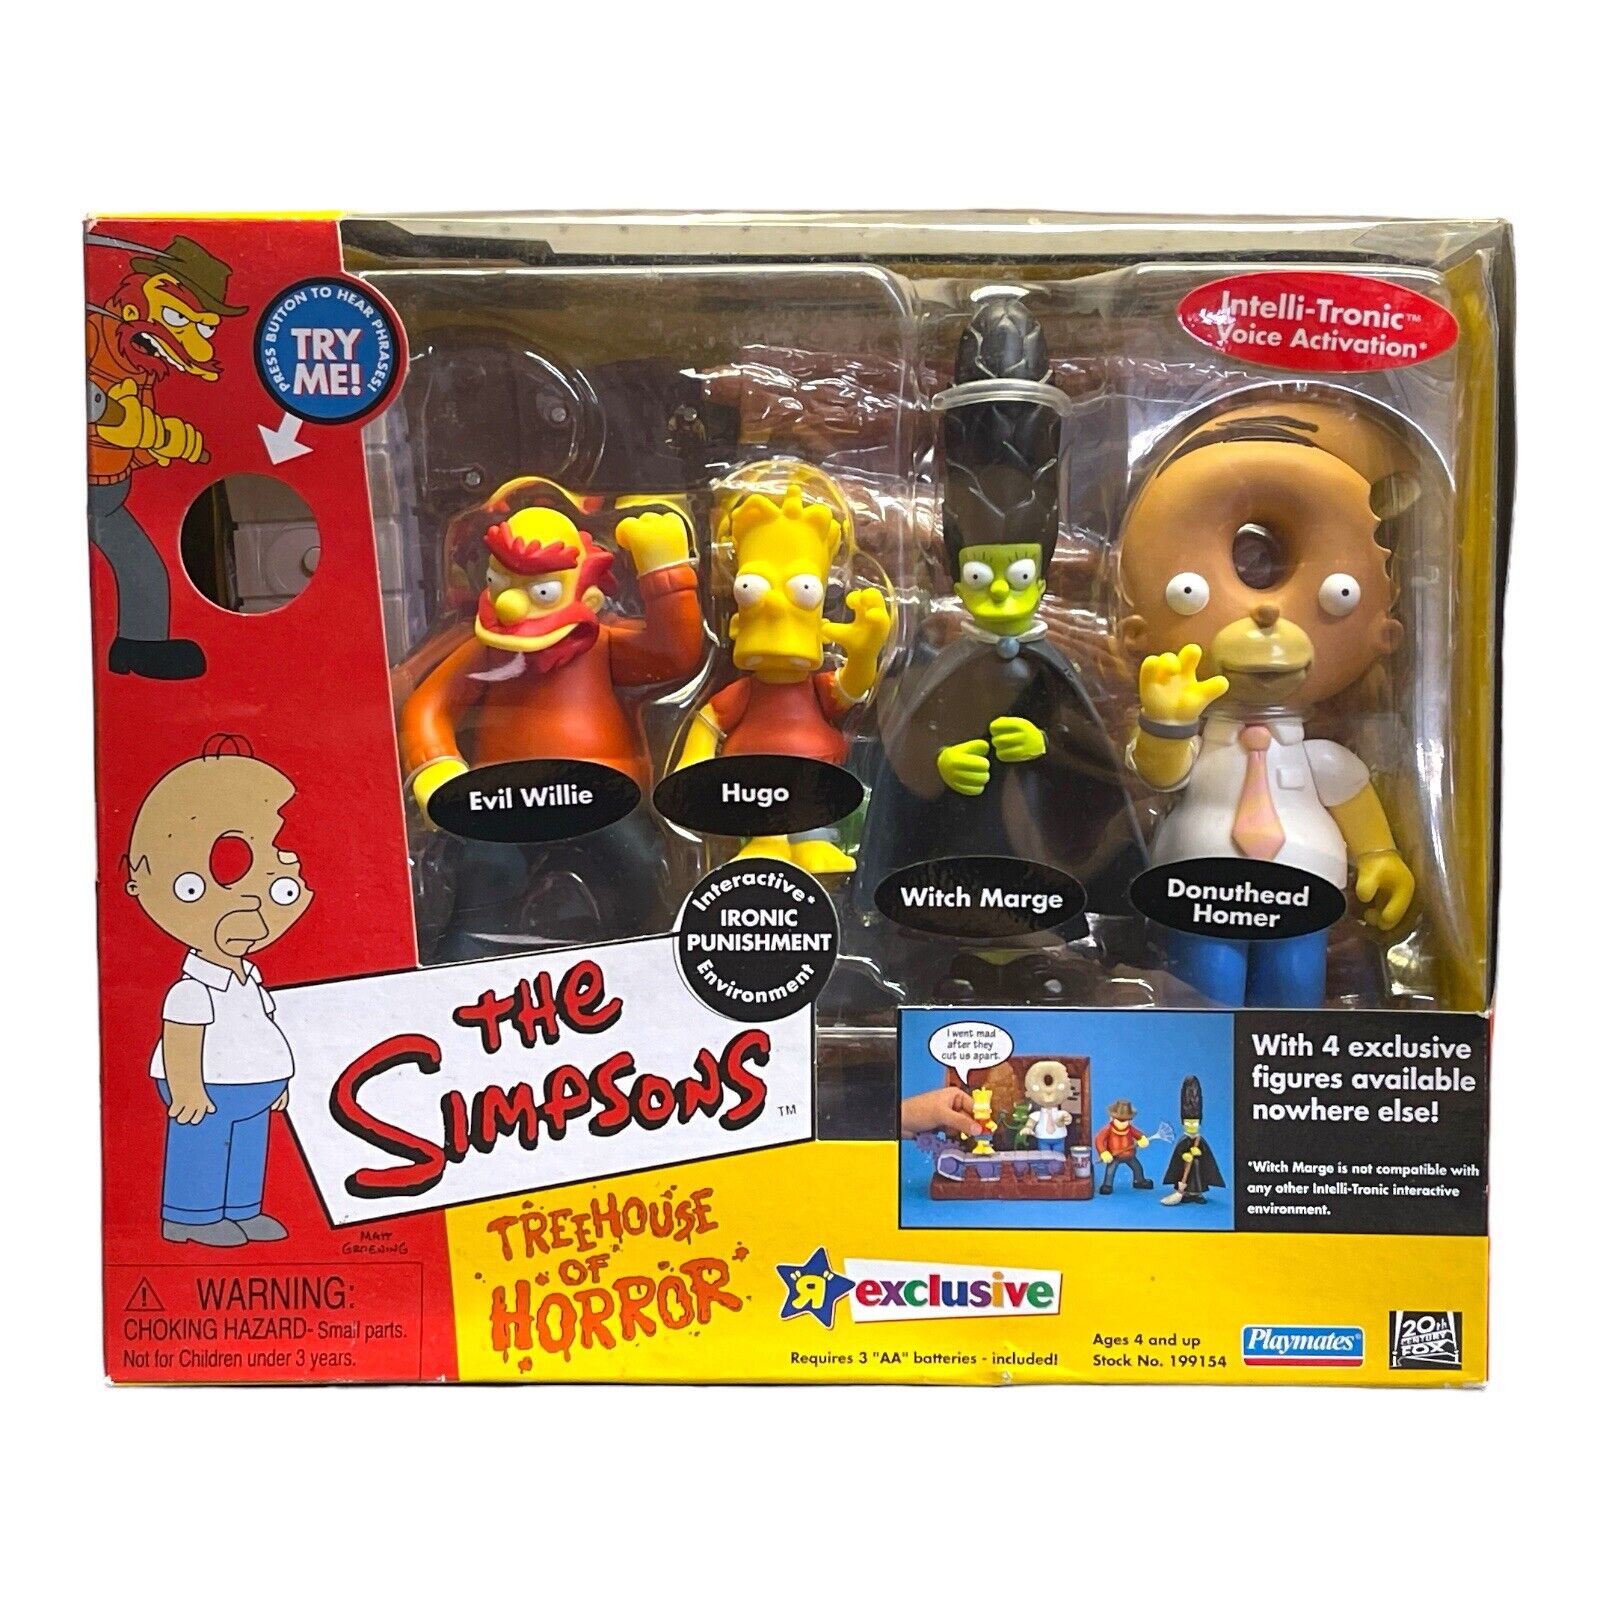 Simpsons TREEHOUSE OF HORROR Donuthead Homer IRONIC PUNISHMENT Playset Figures